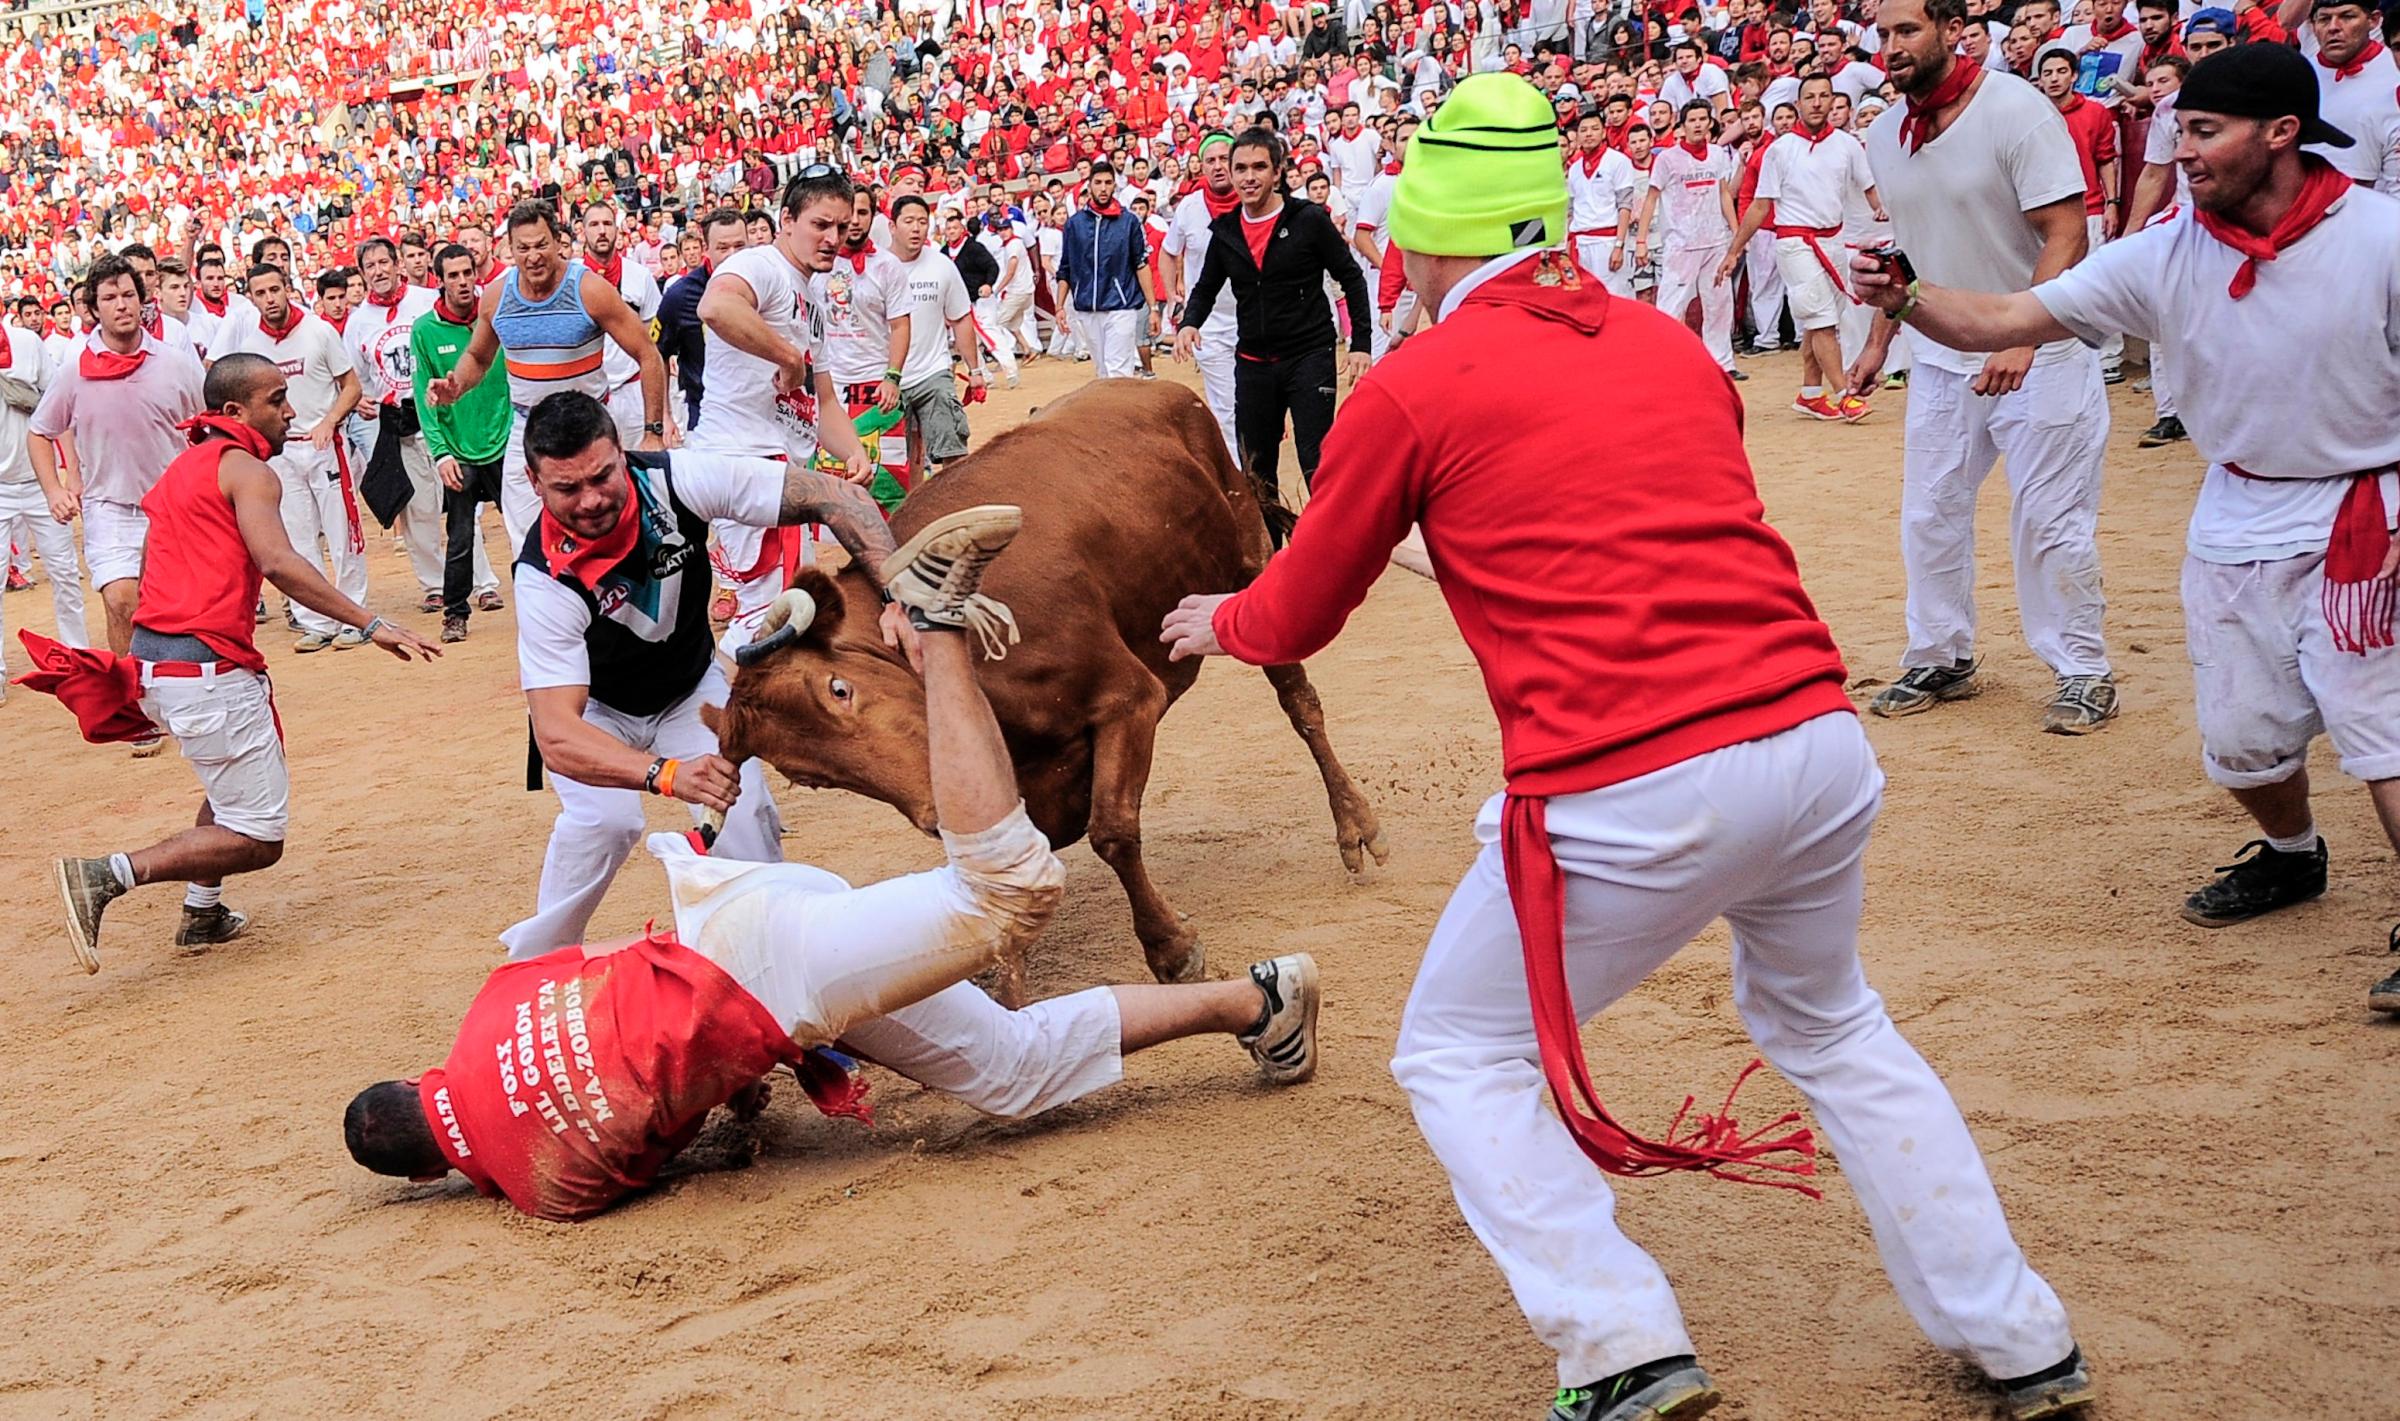 A reveler is hit by a cow on the bull ring, at the San Fermin festival, in Pamplona, Spain on July 8, 2014.